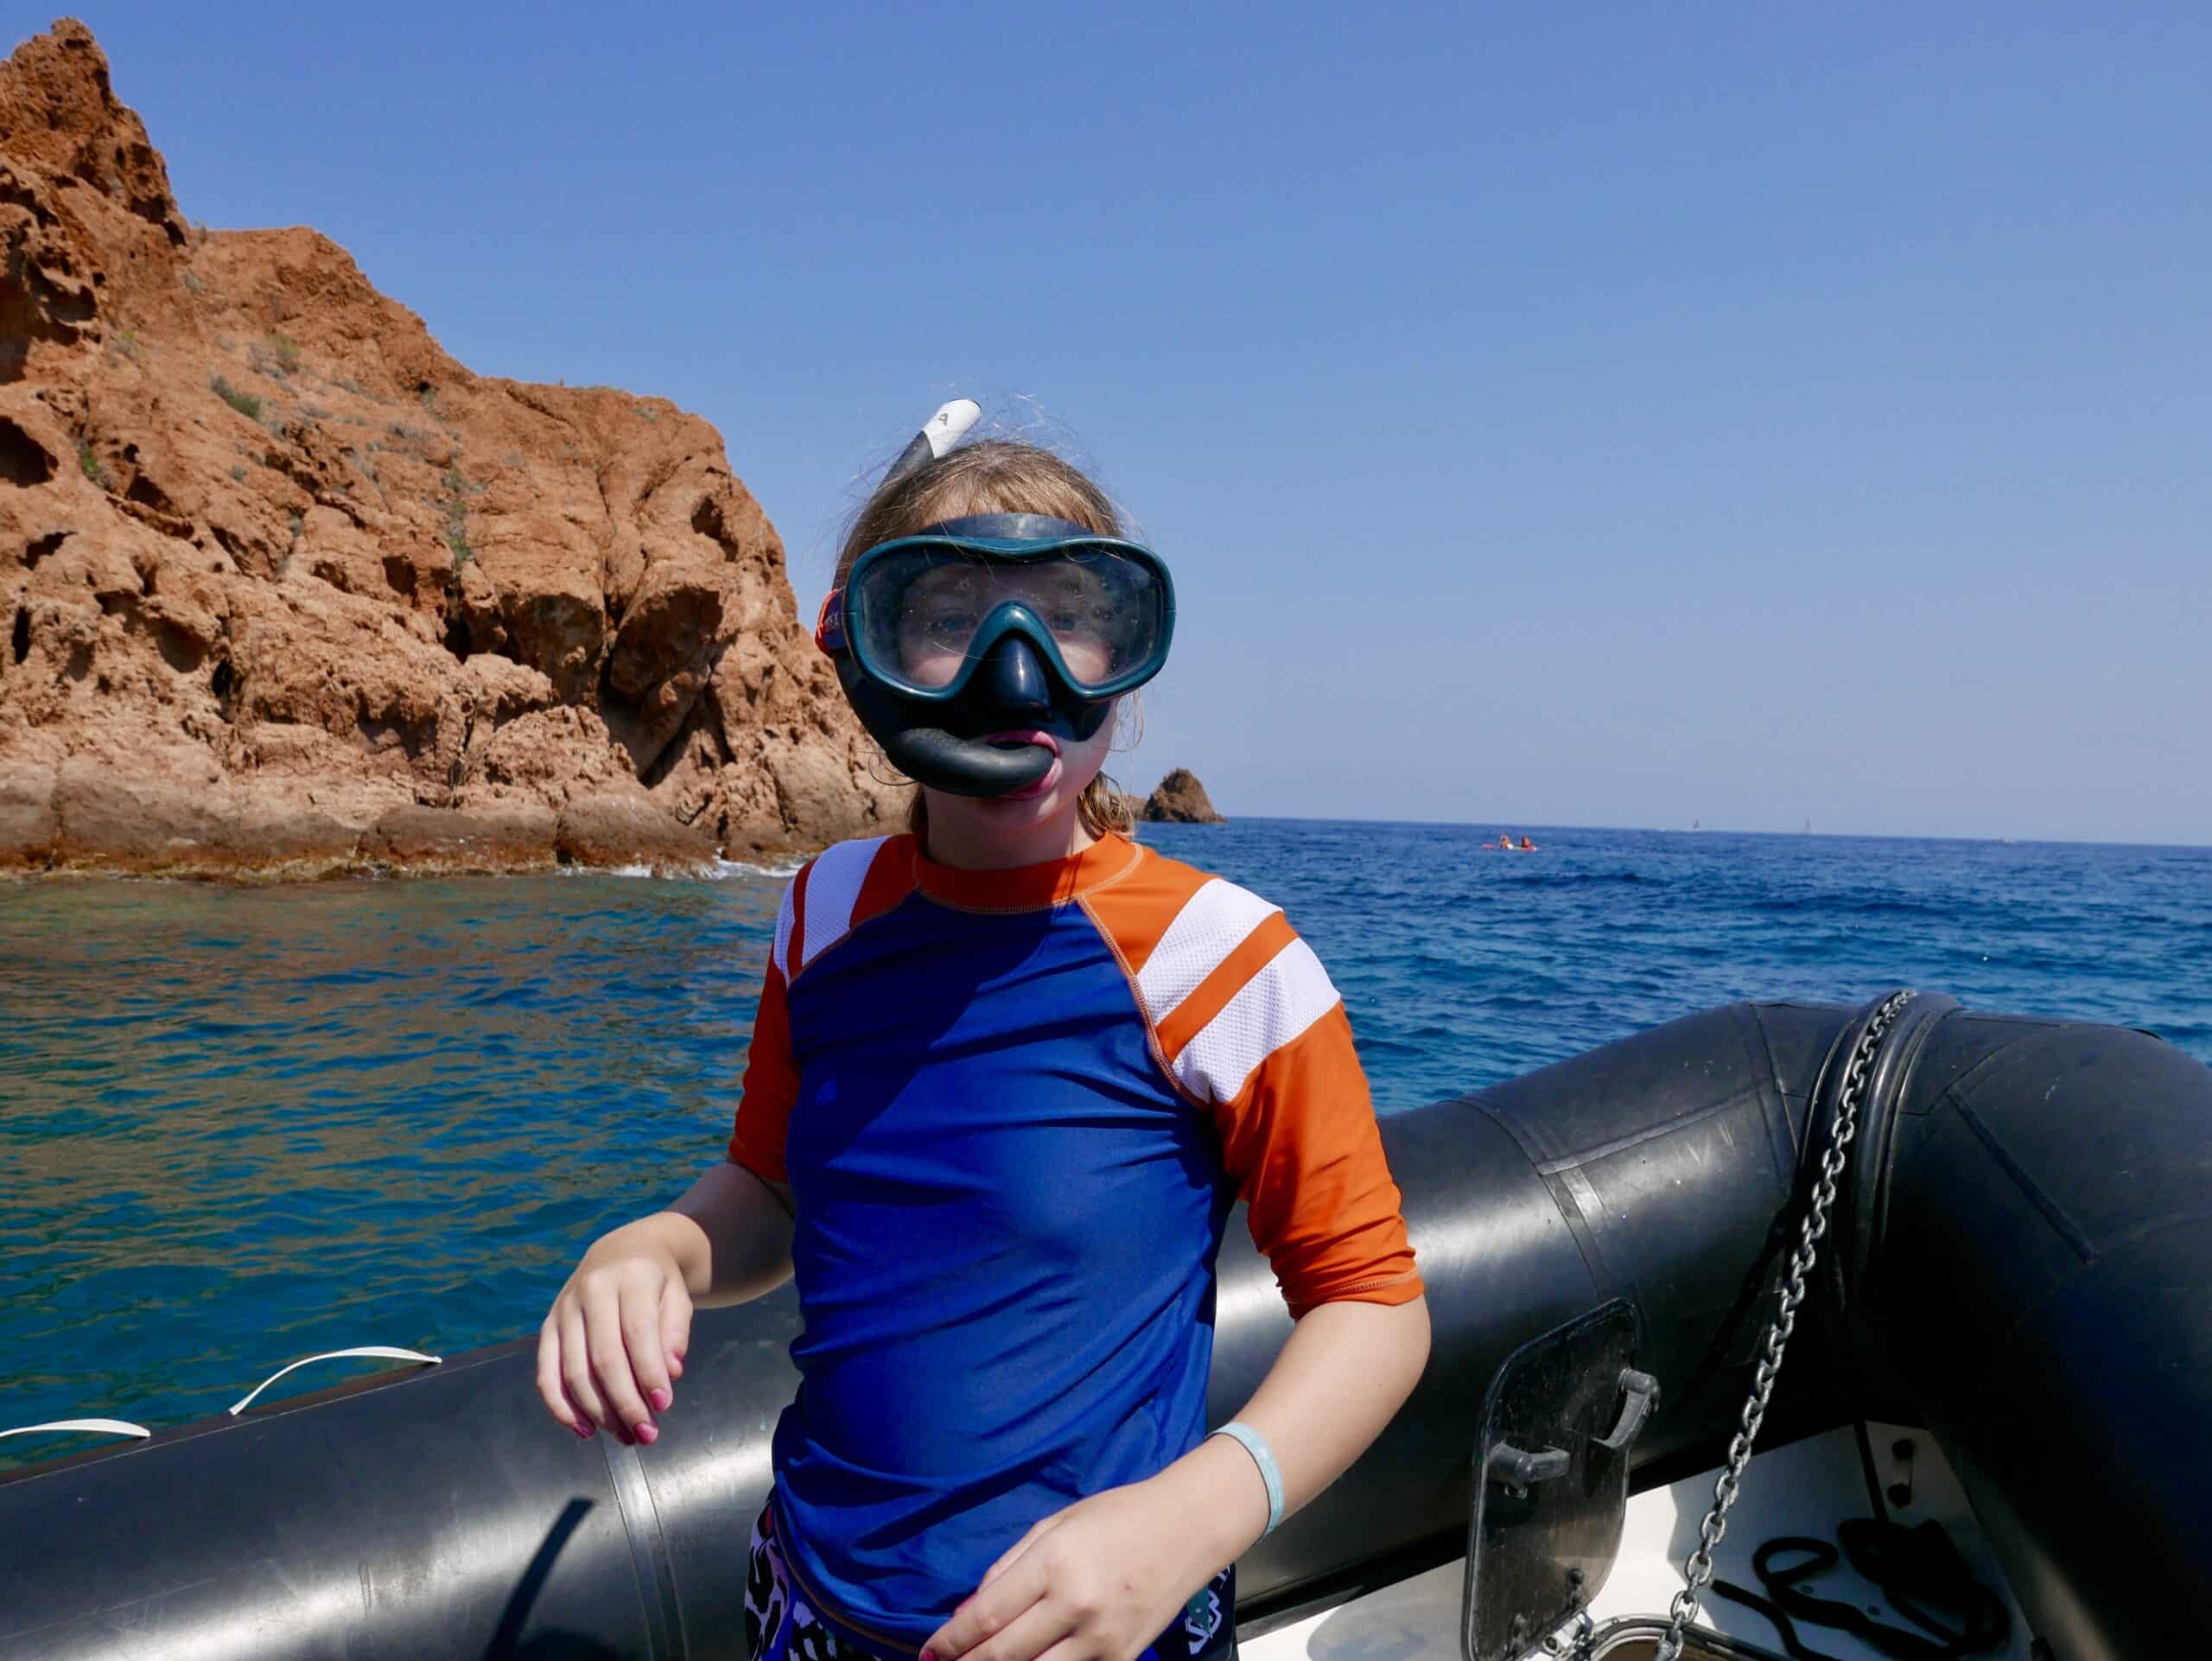 Child ready to snorkel with the Esterel coastline behind them